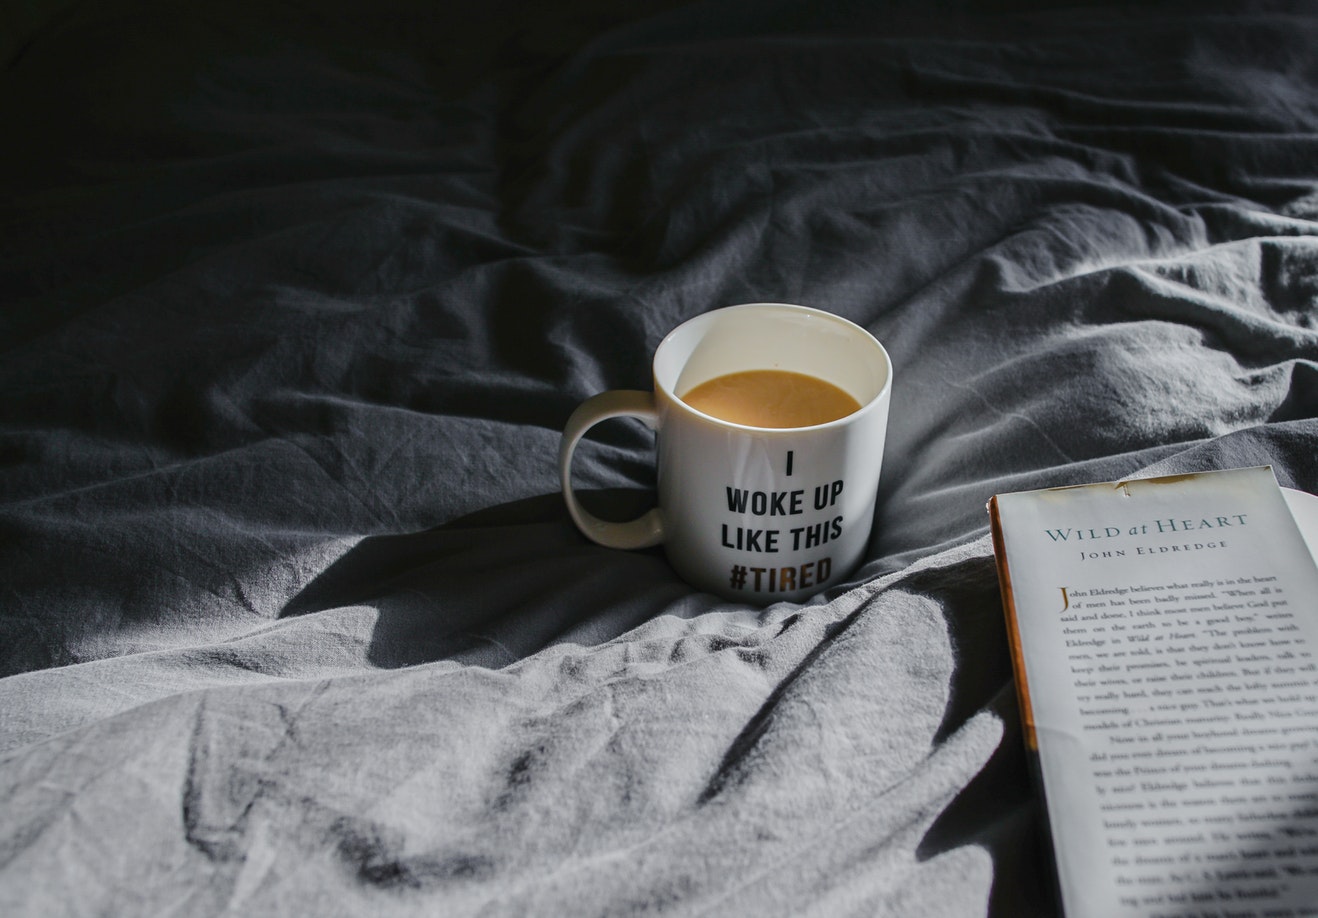 A cup of coffee that says I woke up this tired sits on a bed in the sheets next too an open book.